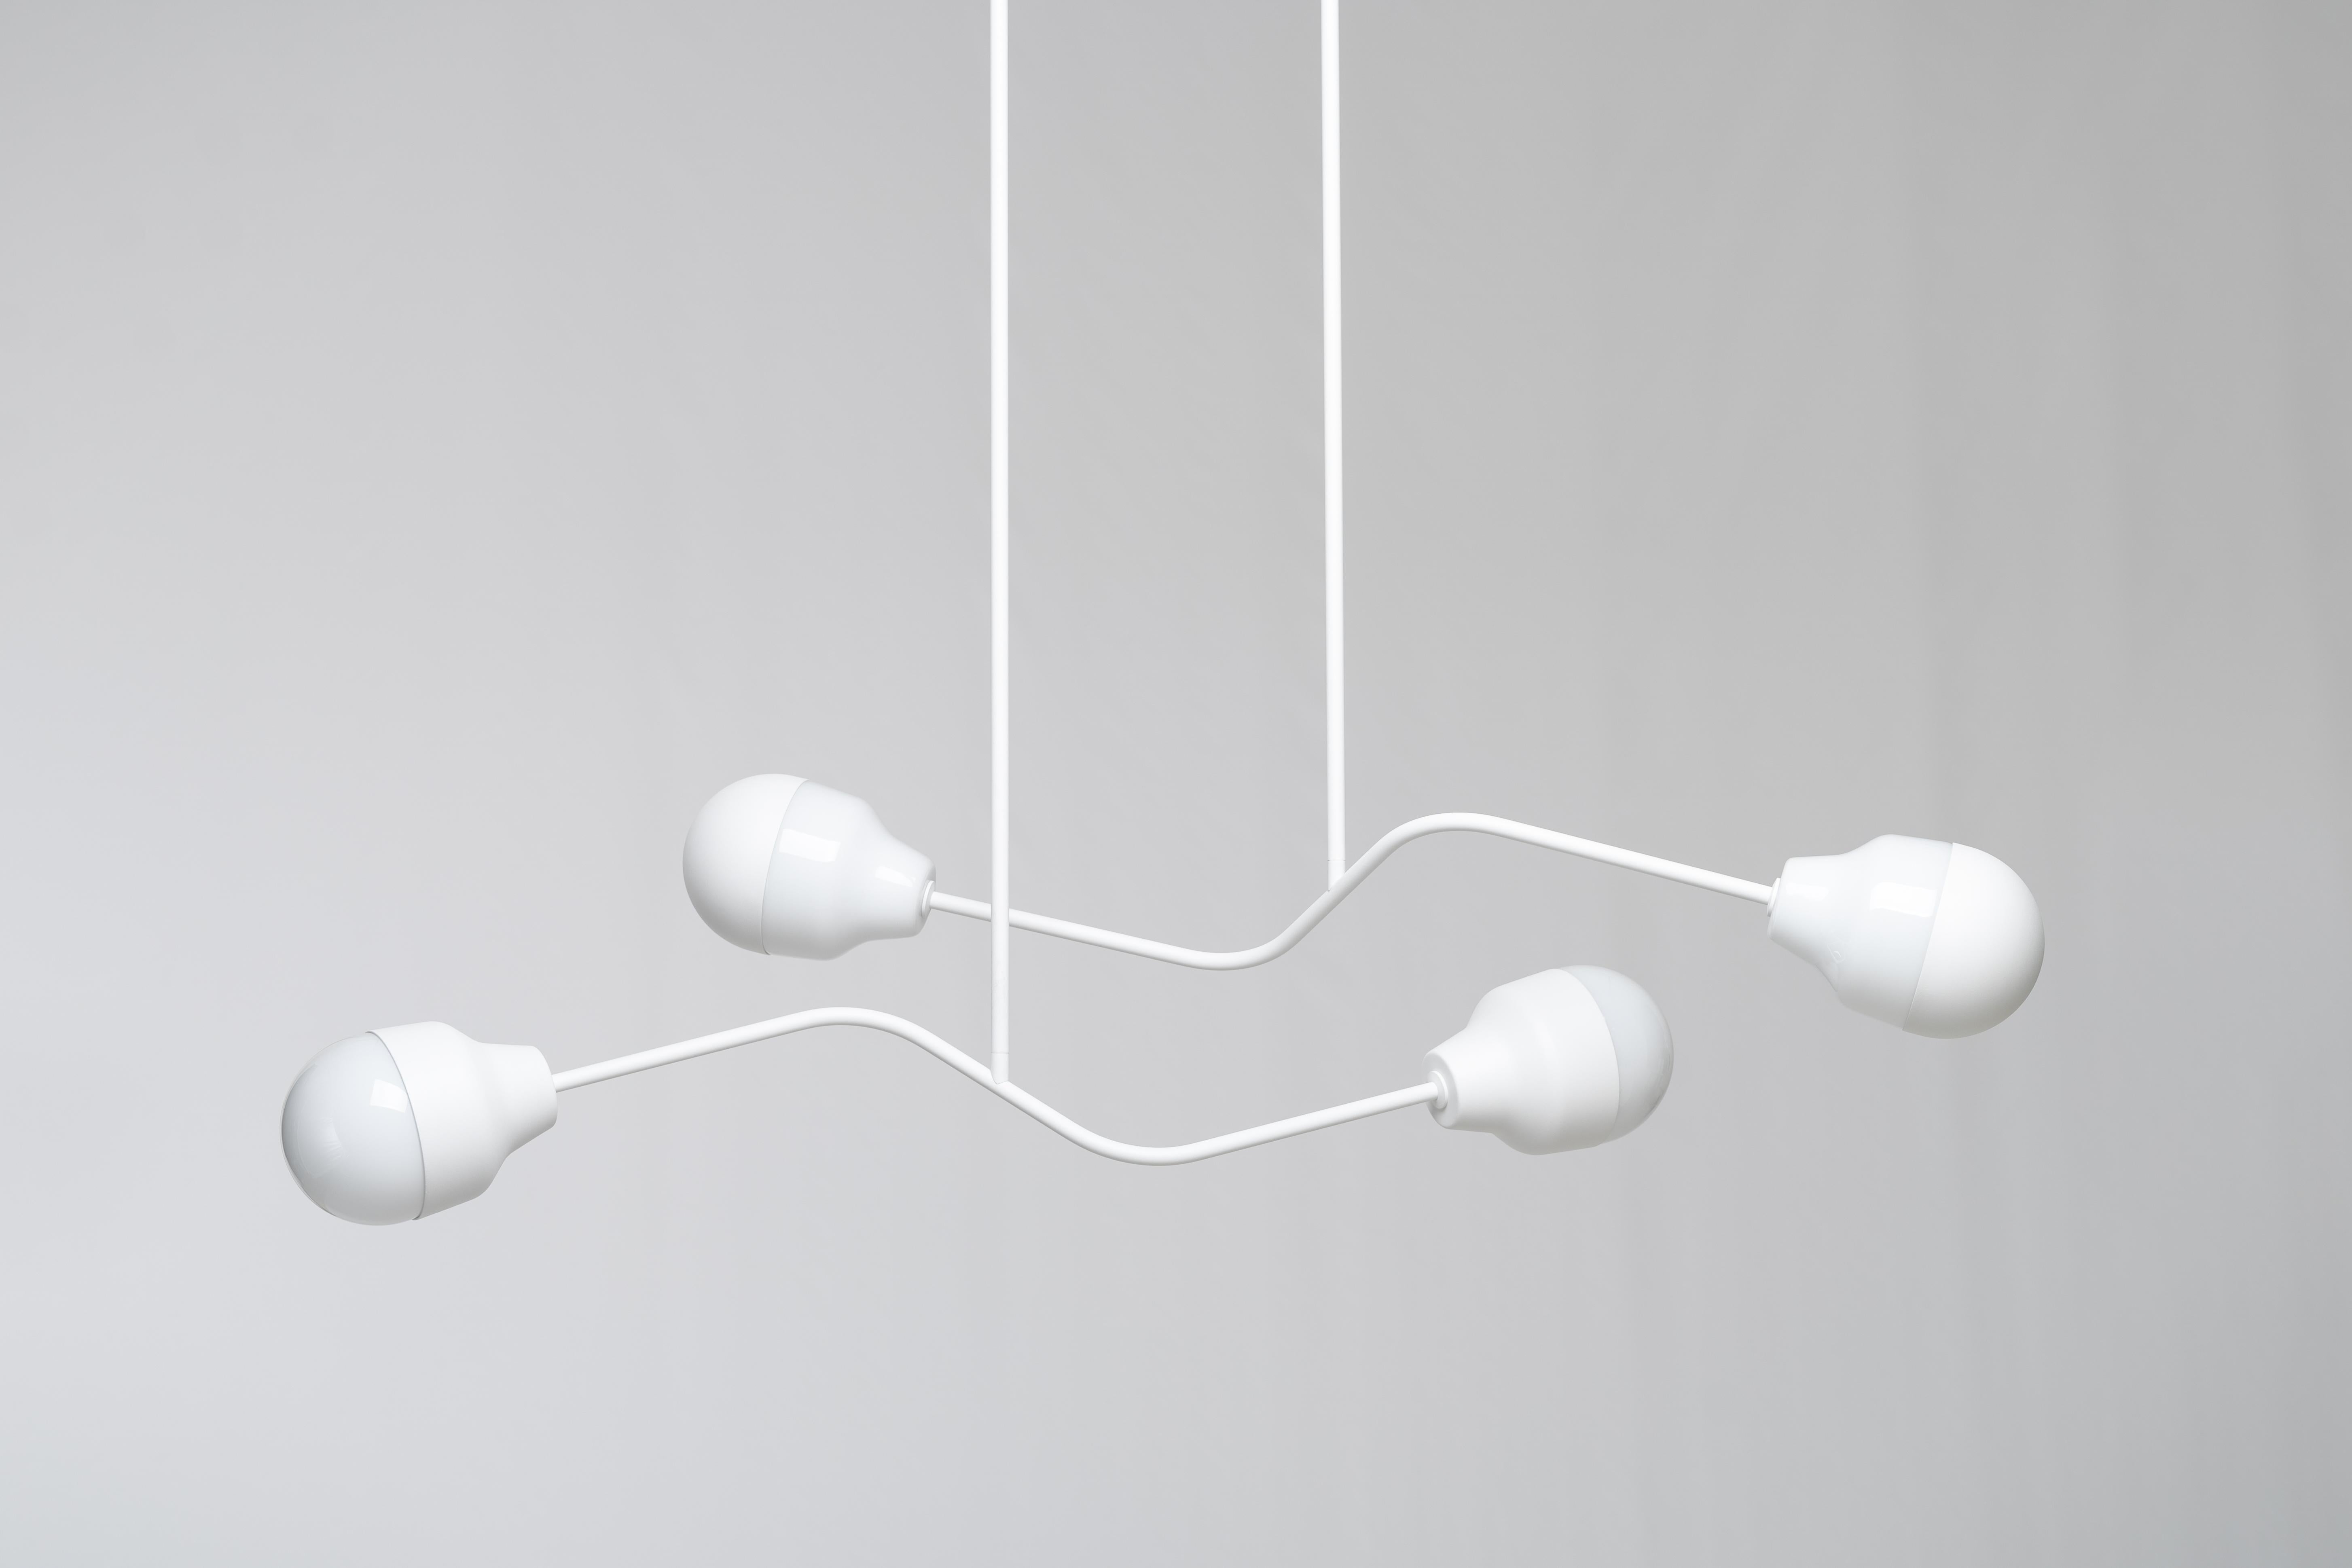 Ambiguo type-05 by Saarepera & Mae
Chandelier

Materials: mouth-blown Murano glass / stainless steel and aluminum
Light source: Built-in LED 100-240V / Dimmable

Dimensions: 
L 126 cm / 49.6 in
W 17.5 cm / 6.9 in

Fixing: 
Hanging from a